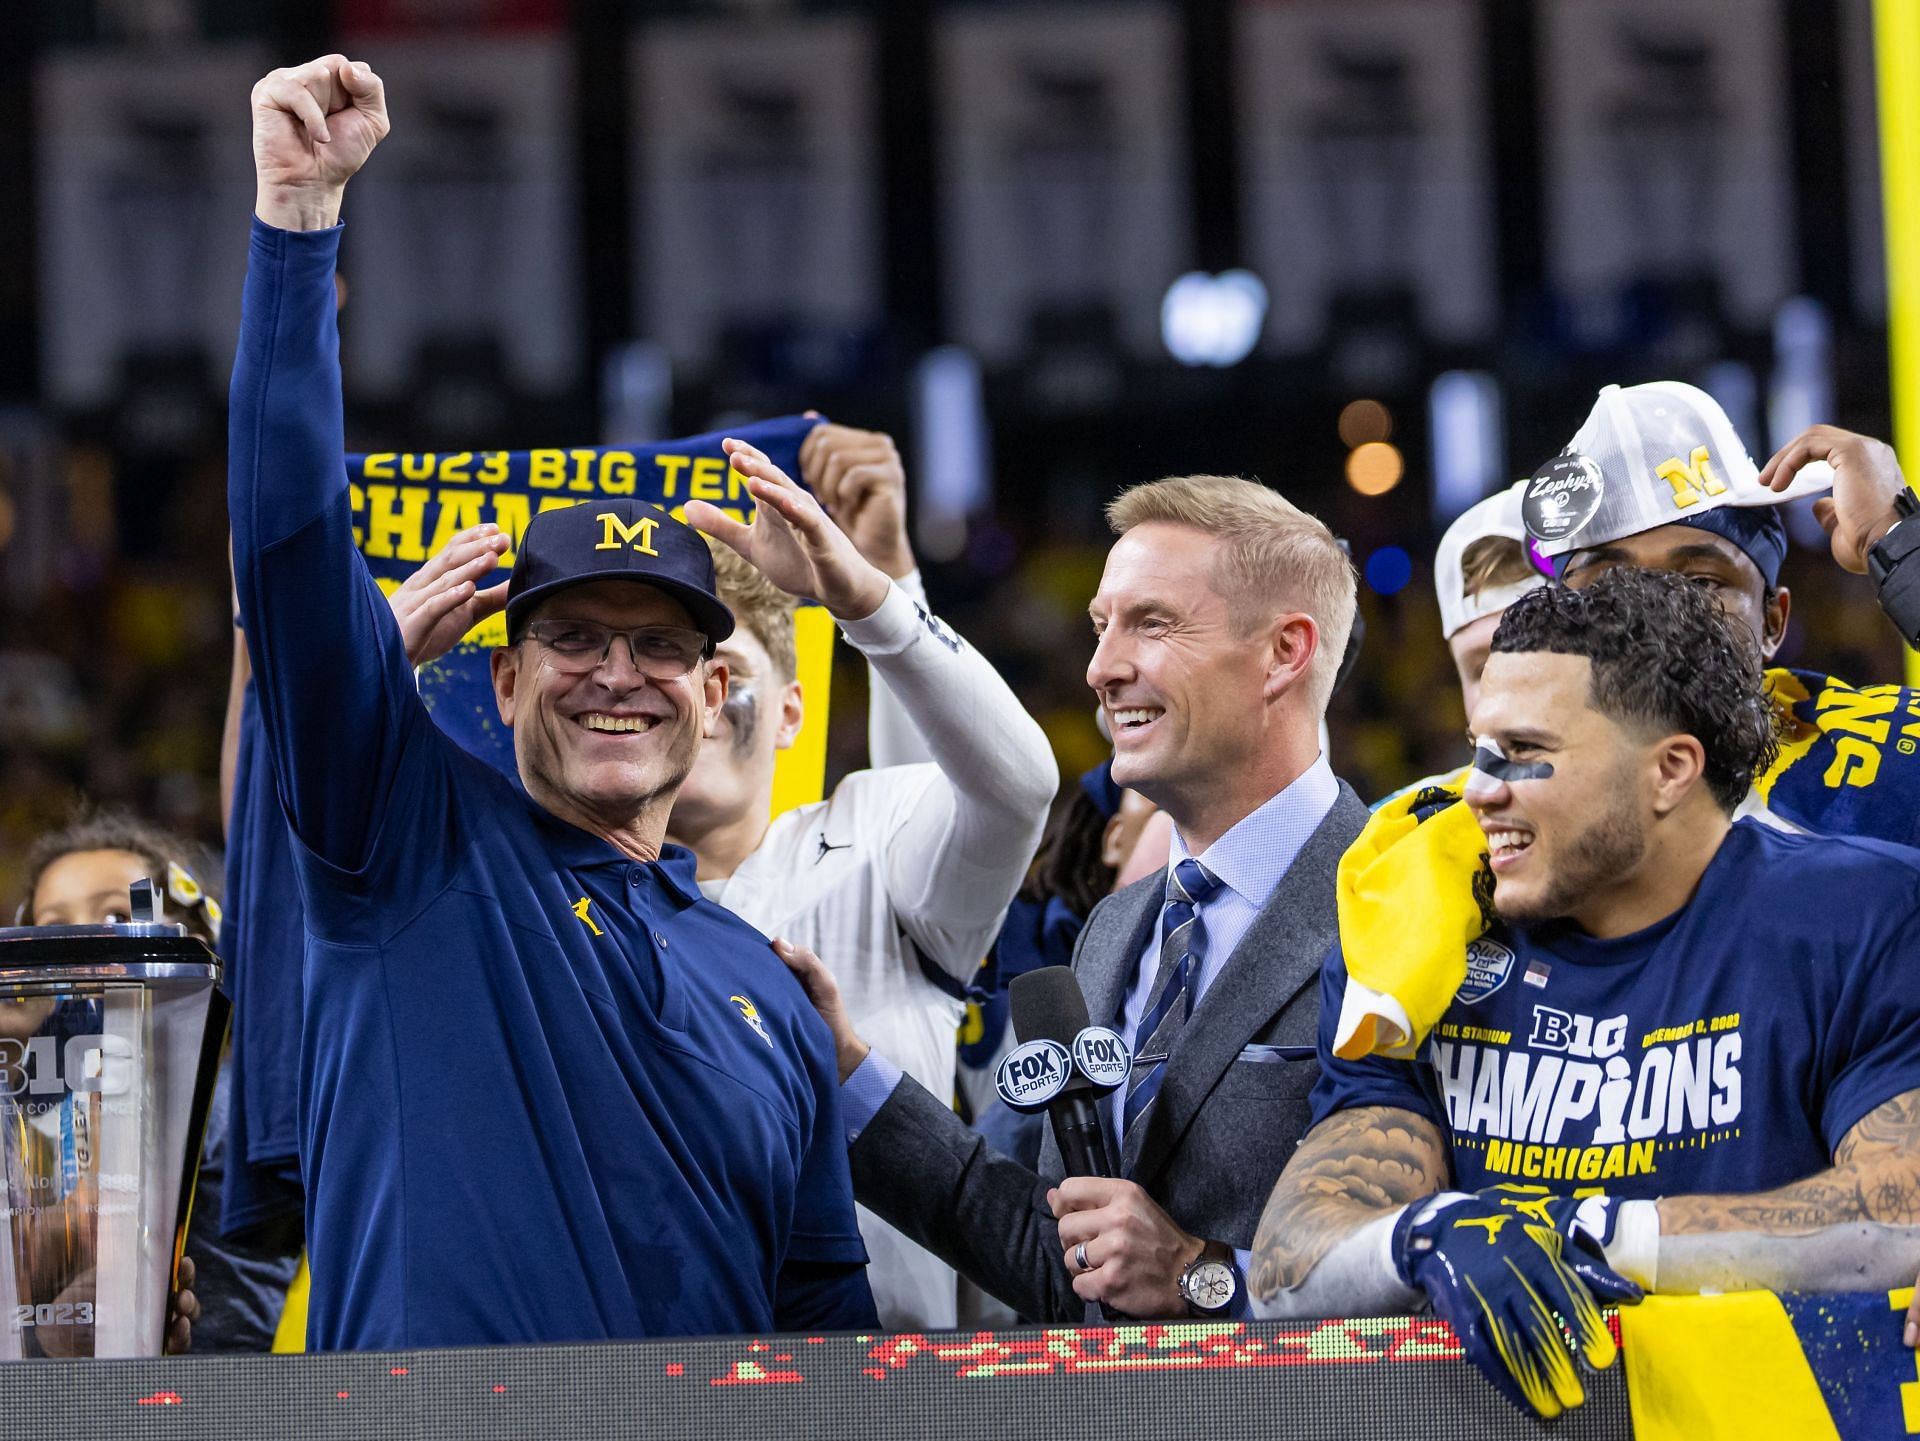 Jim Harbaugh might be coming to the NFL